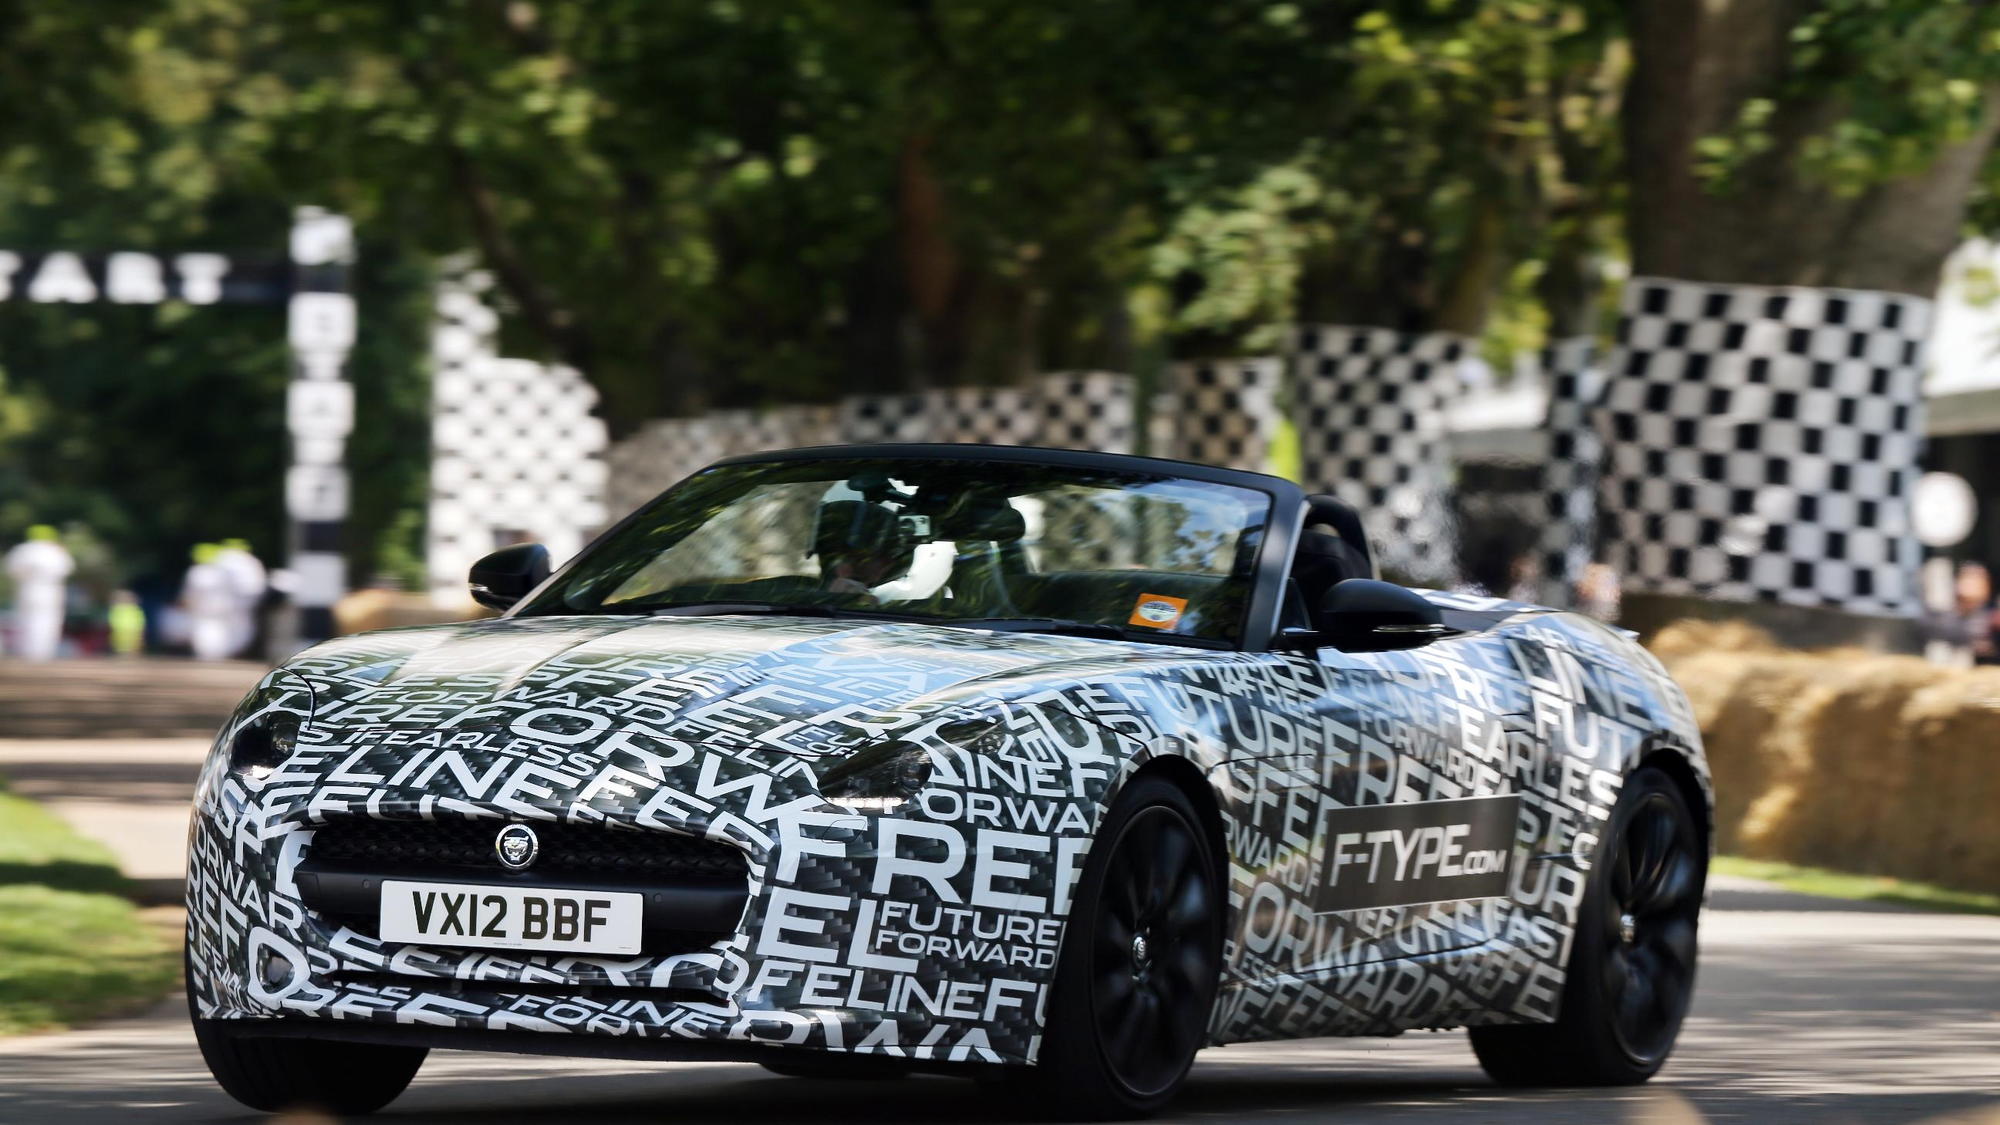 Jaguar F-Type at the Goodwood Festival of Speed